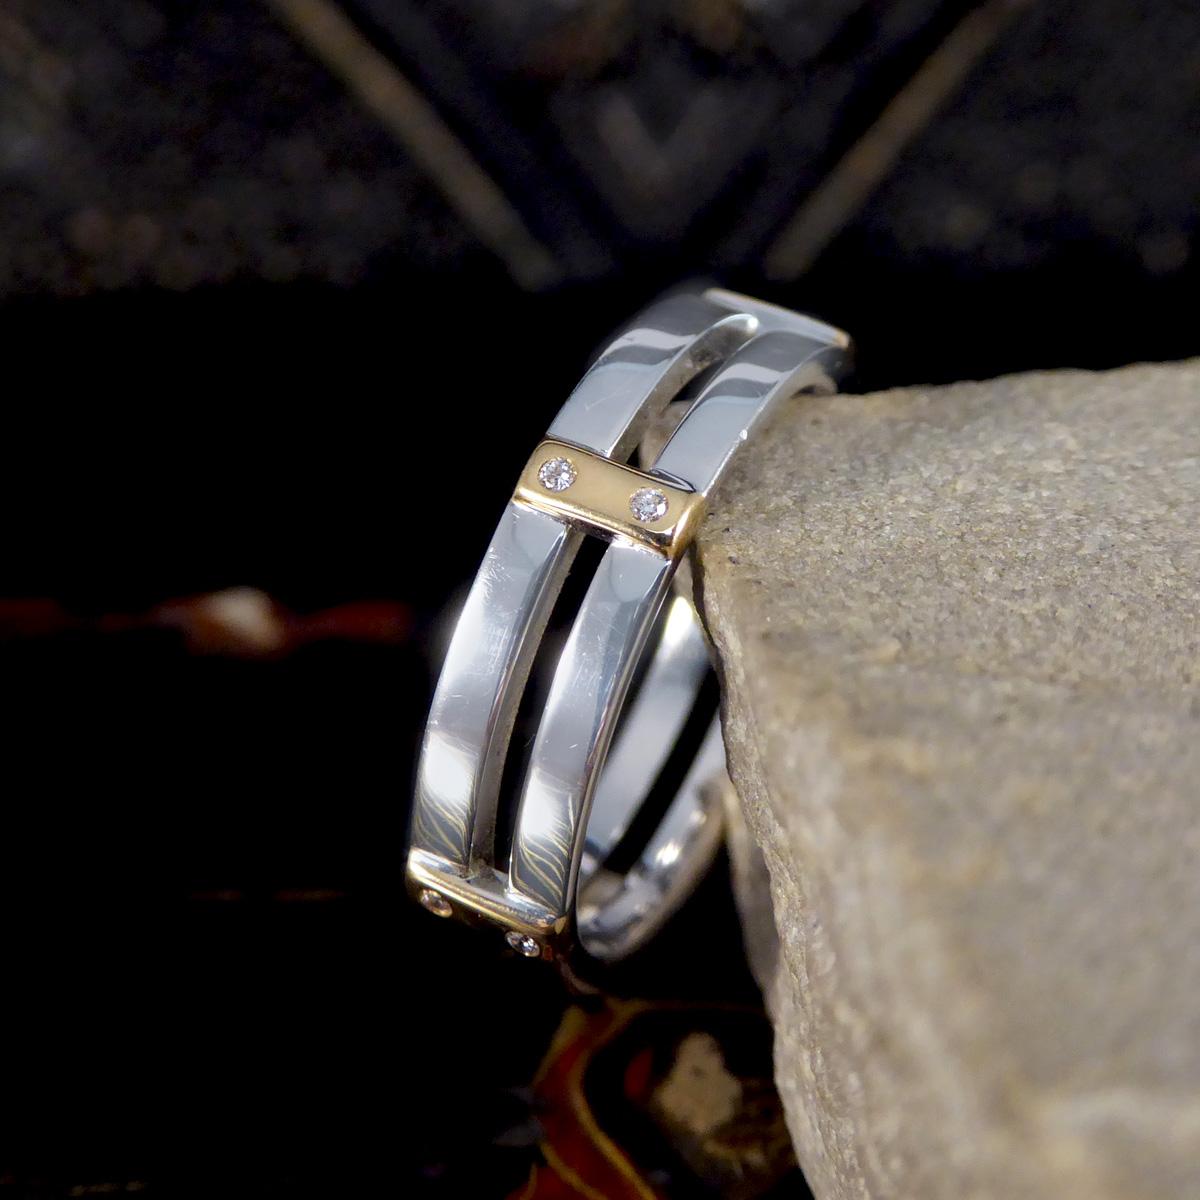 This Brown and Newirth two tone Diamond set bar band ring is a masterpiece of modern craftsmanship and design, elegantly crafted in 18ct gold. This exquisite ring features a sophisticated two-tone design, blending the warm, classic appeal of yellow